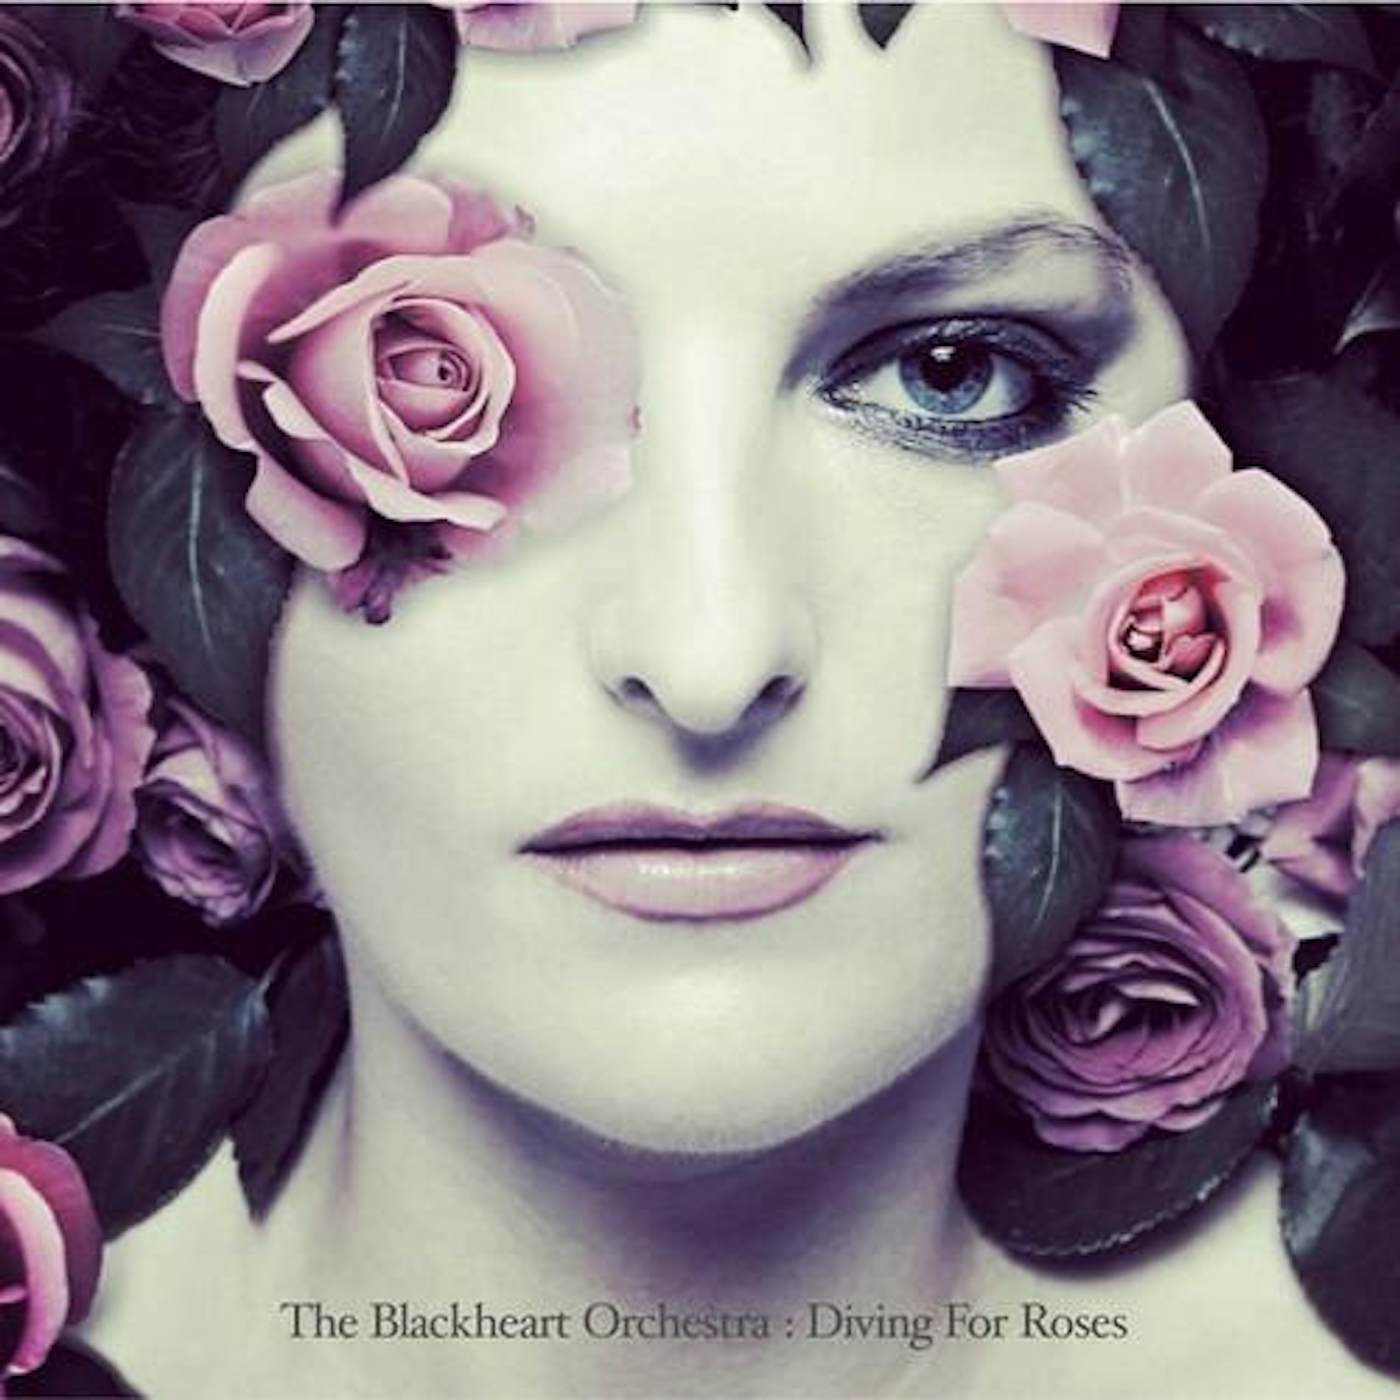 The Blackheart Orchestra Diving for Roses Vinyl Record